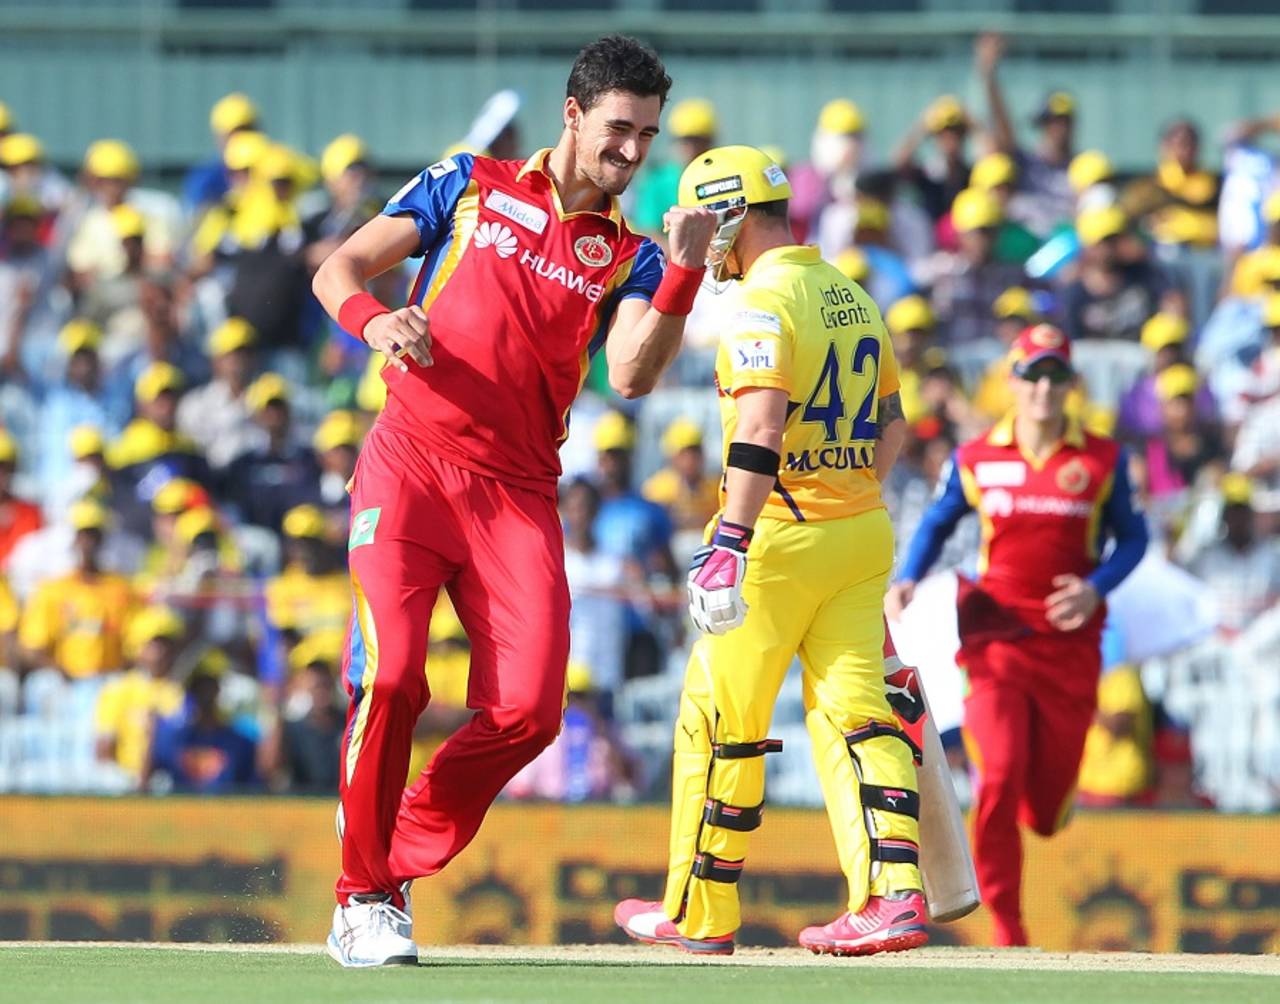 Mitchell Starc set the tone for Royal Challengers Bangalore, beating Dwayne Smith four times off the first five deliveries before bowling him on the sixth ball&nbsp;&nbsp;&bull;&nbsp;&nbsp;BCCI